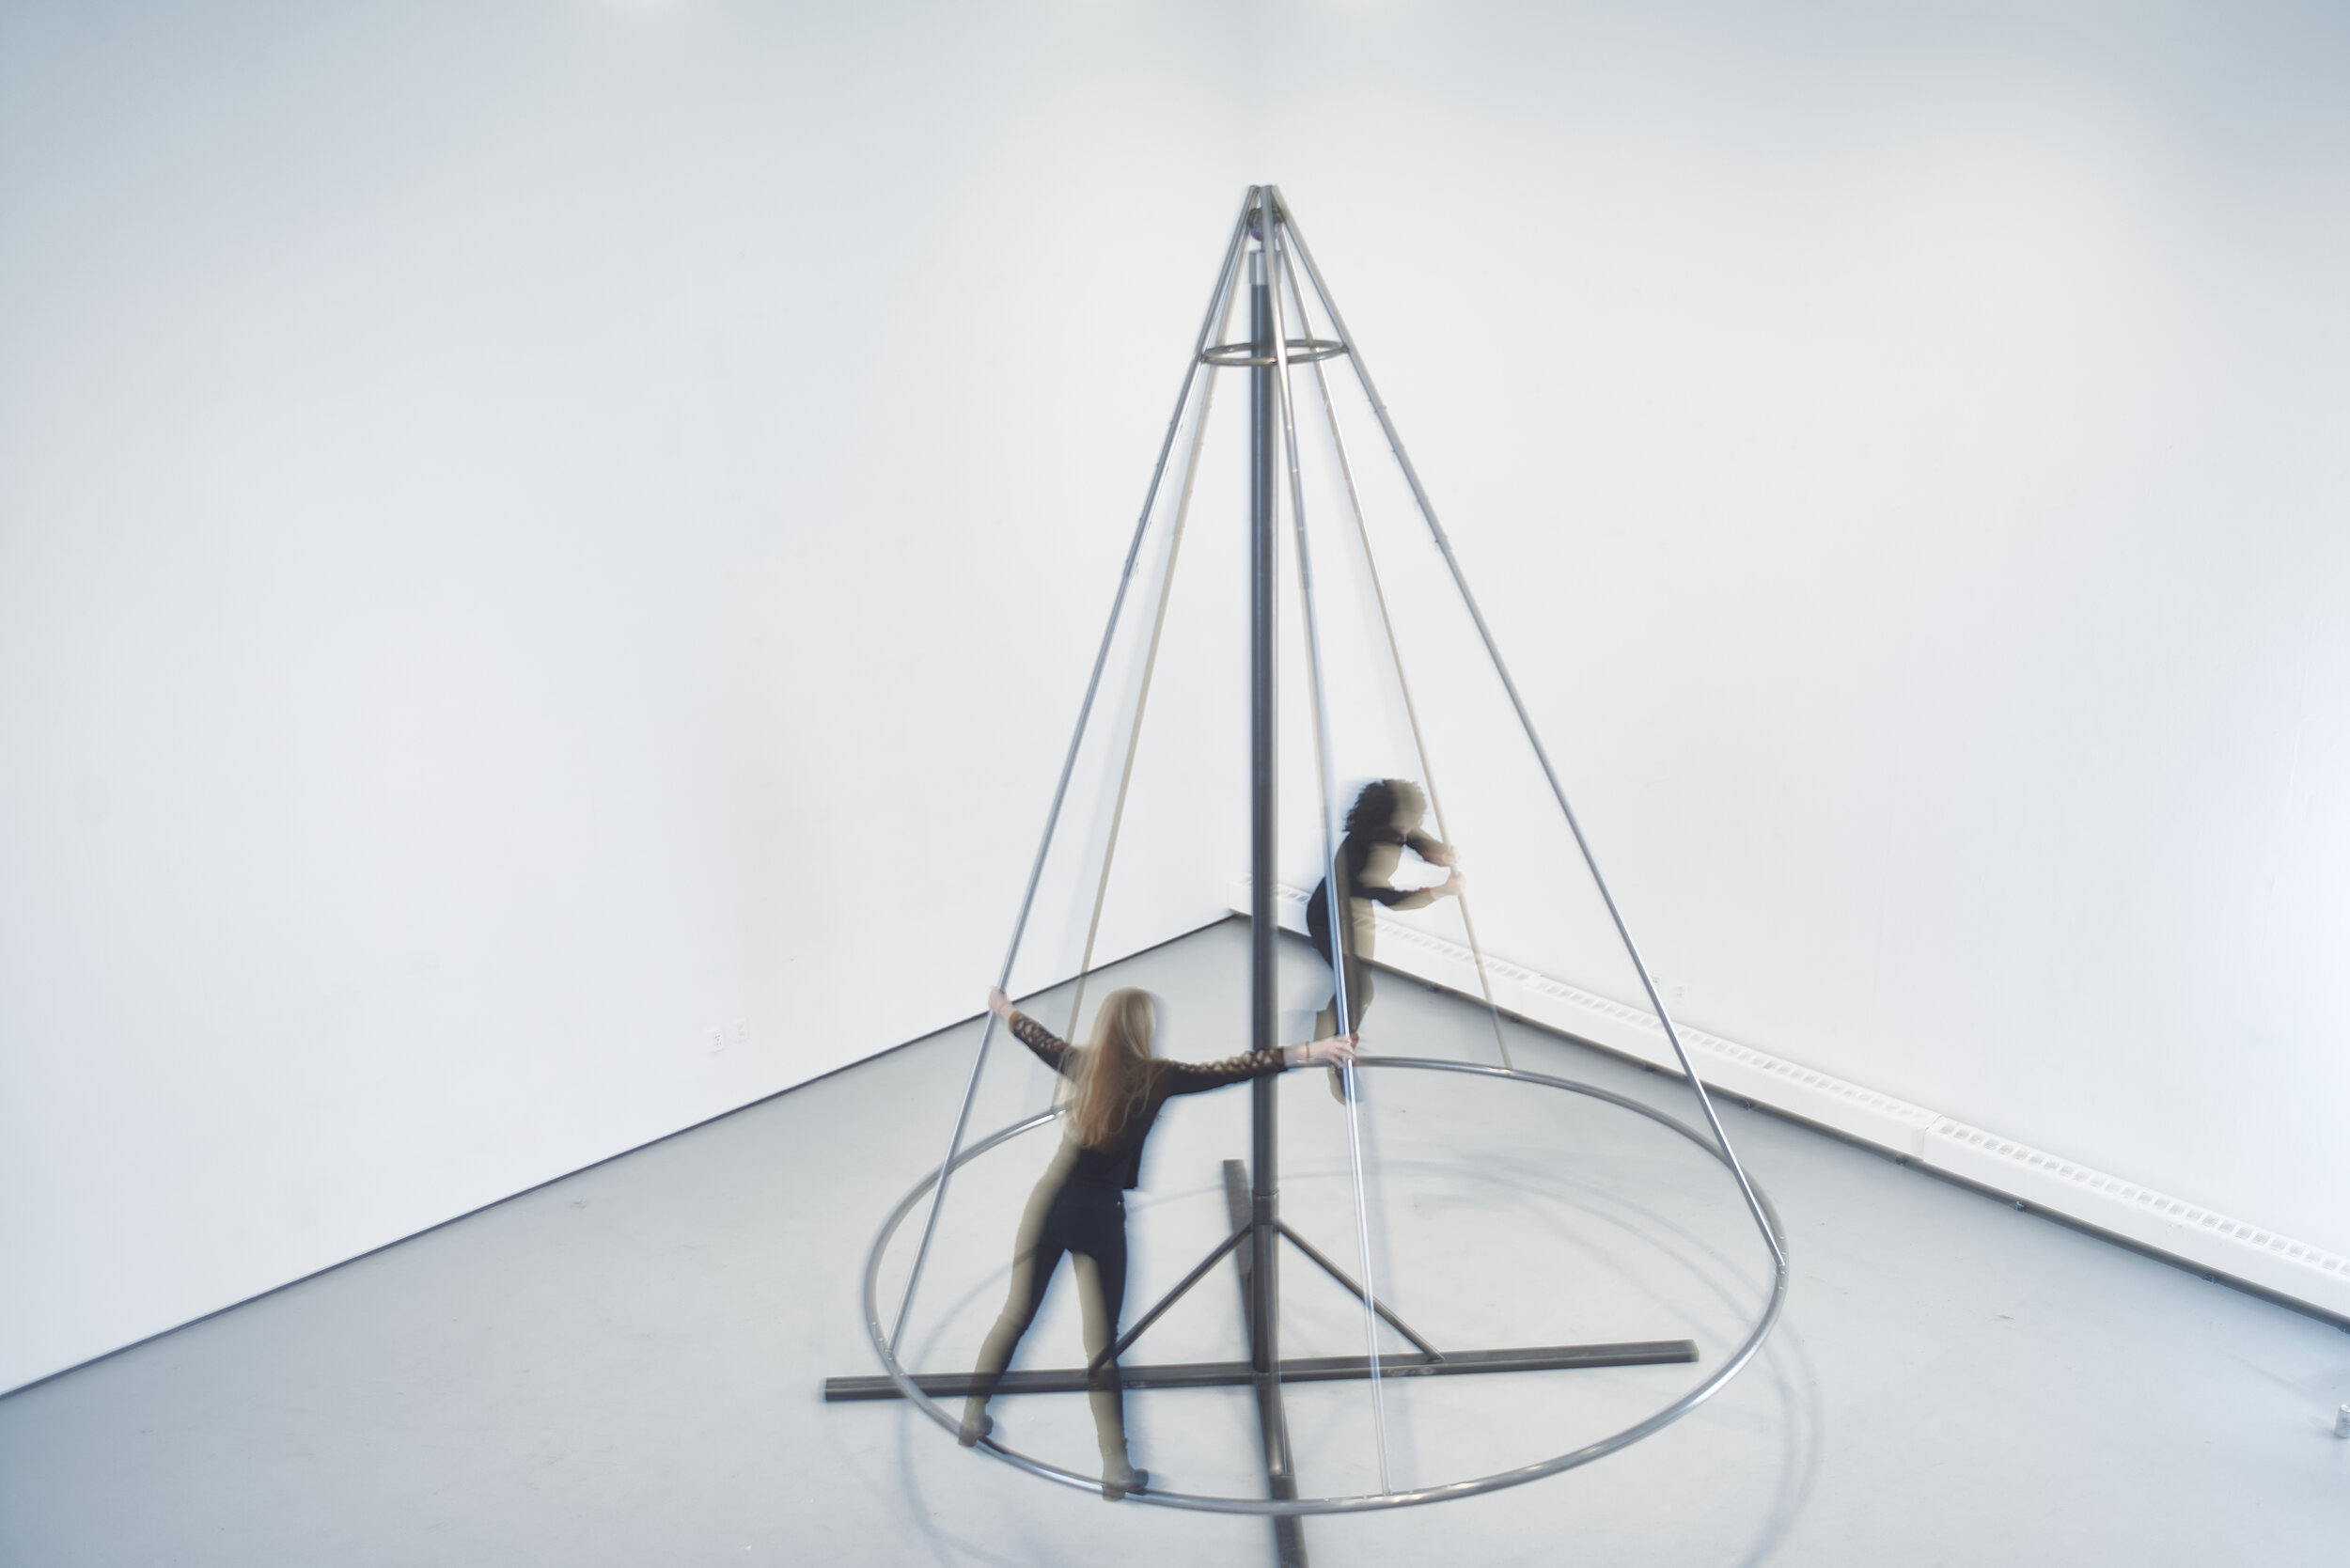  Anna Miller  GO ROUND , 2020 Steel and duck pin bowling ball 192 x 144 inches (488 x 366 cm)  Photo by Merik Goma Photography 